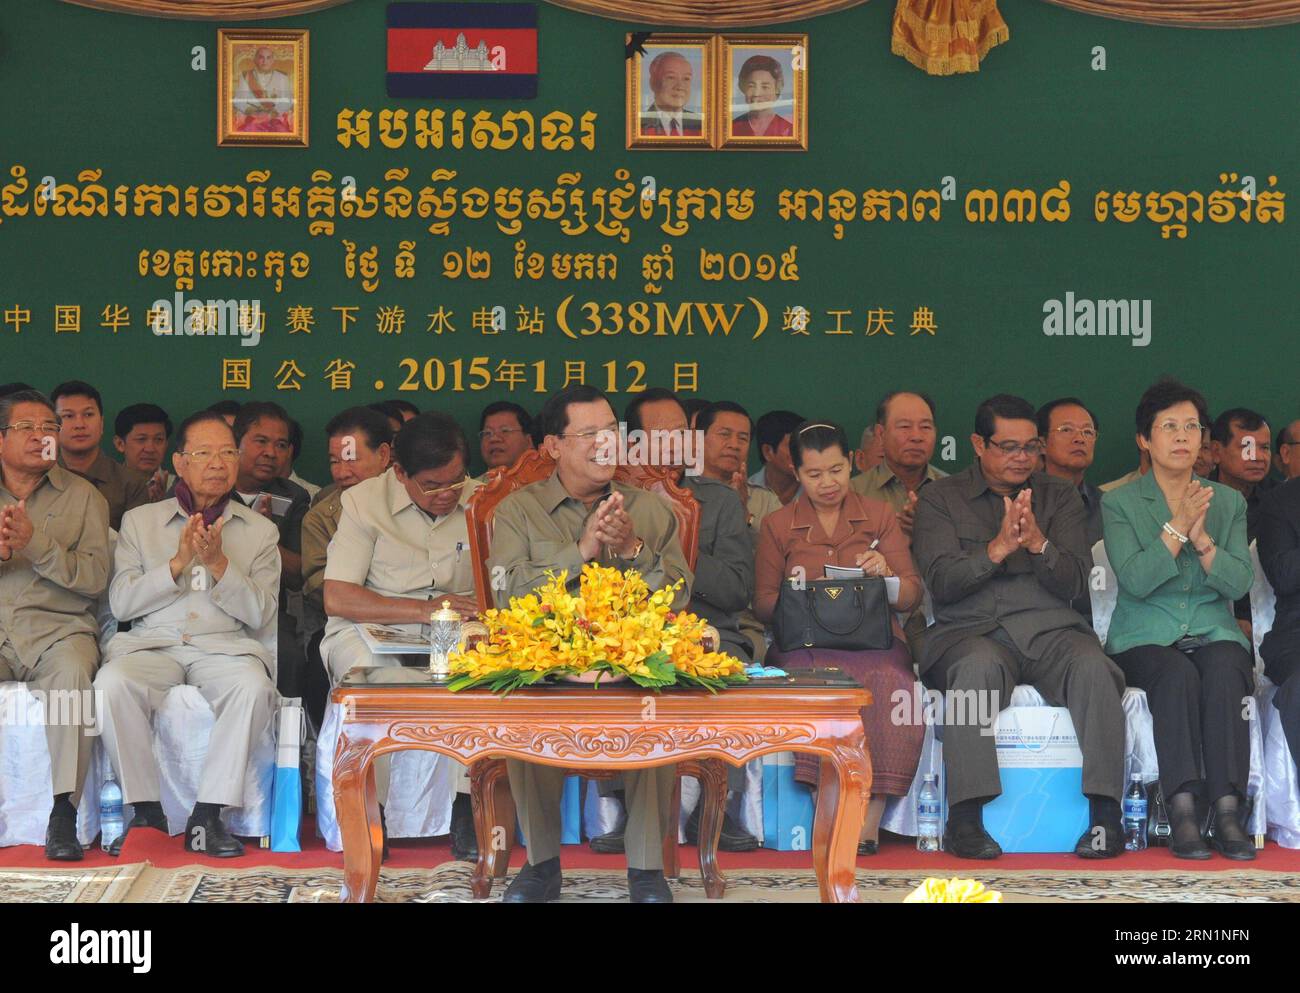 KOH KONG, Jan. 12, 2015 -- Cambodian Prime Minister Hun Sen (C, front) presides over the inauguration ceremony of the Chinese-built 338-megawatt Russei Chrum Krom River hydropower dam in Koh Kong province, Cambodia, Jan. 12, 2015. The hydroelectric dam, Cambodia s largest hydropower station so far, commenced operation on Monday after it had been constructed for nearly five years. ) CAMBODIA-KOH KONG-HYDROPOWER DAM-CHINA LixHong PUBLICATIONxNOTxINxCHN   Koh Kong Jan 12 2015 Cambodian Prime Ministers HUN Sen C Front Presid Over The Inauguration Ceremony of The Chinese built  Megawatts   Krom Riv Stock Photo